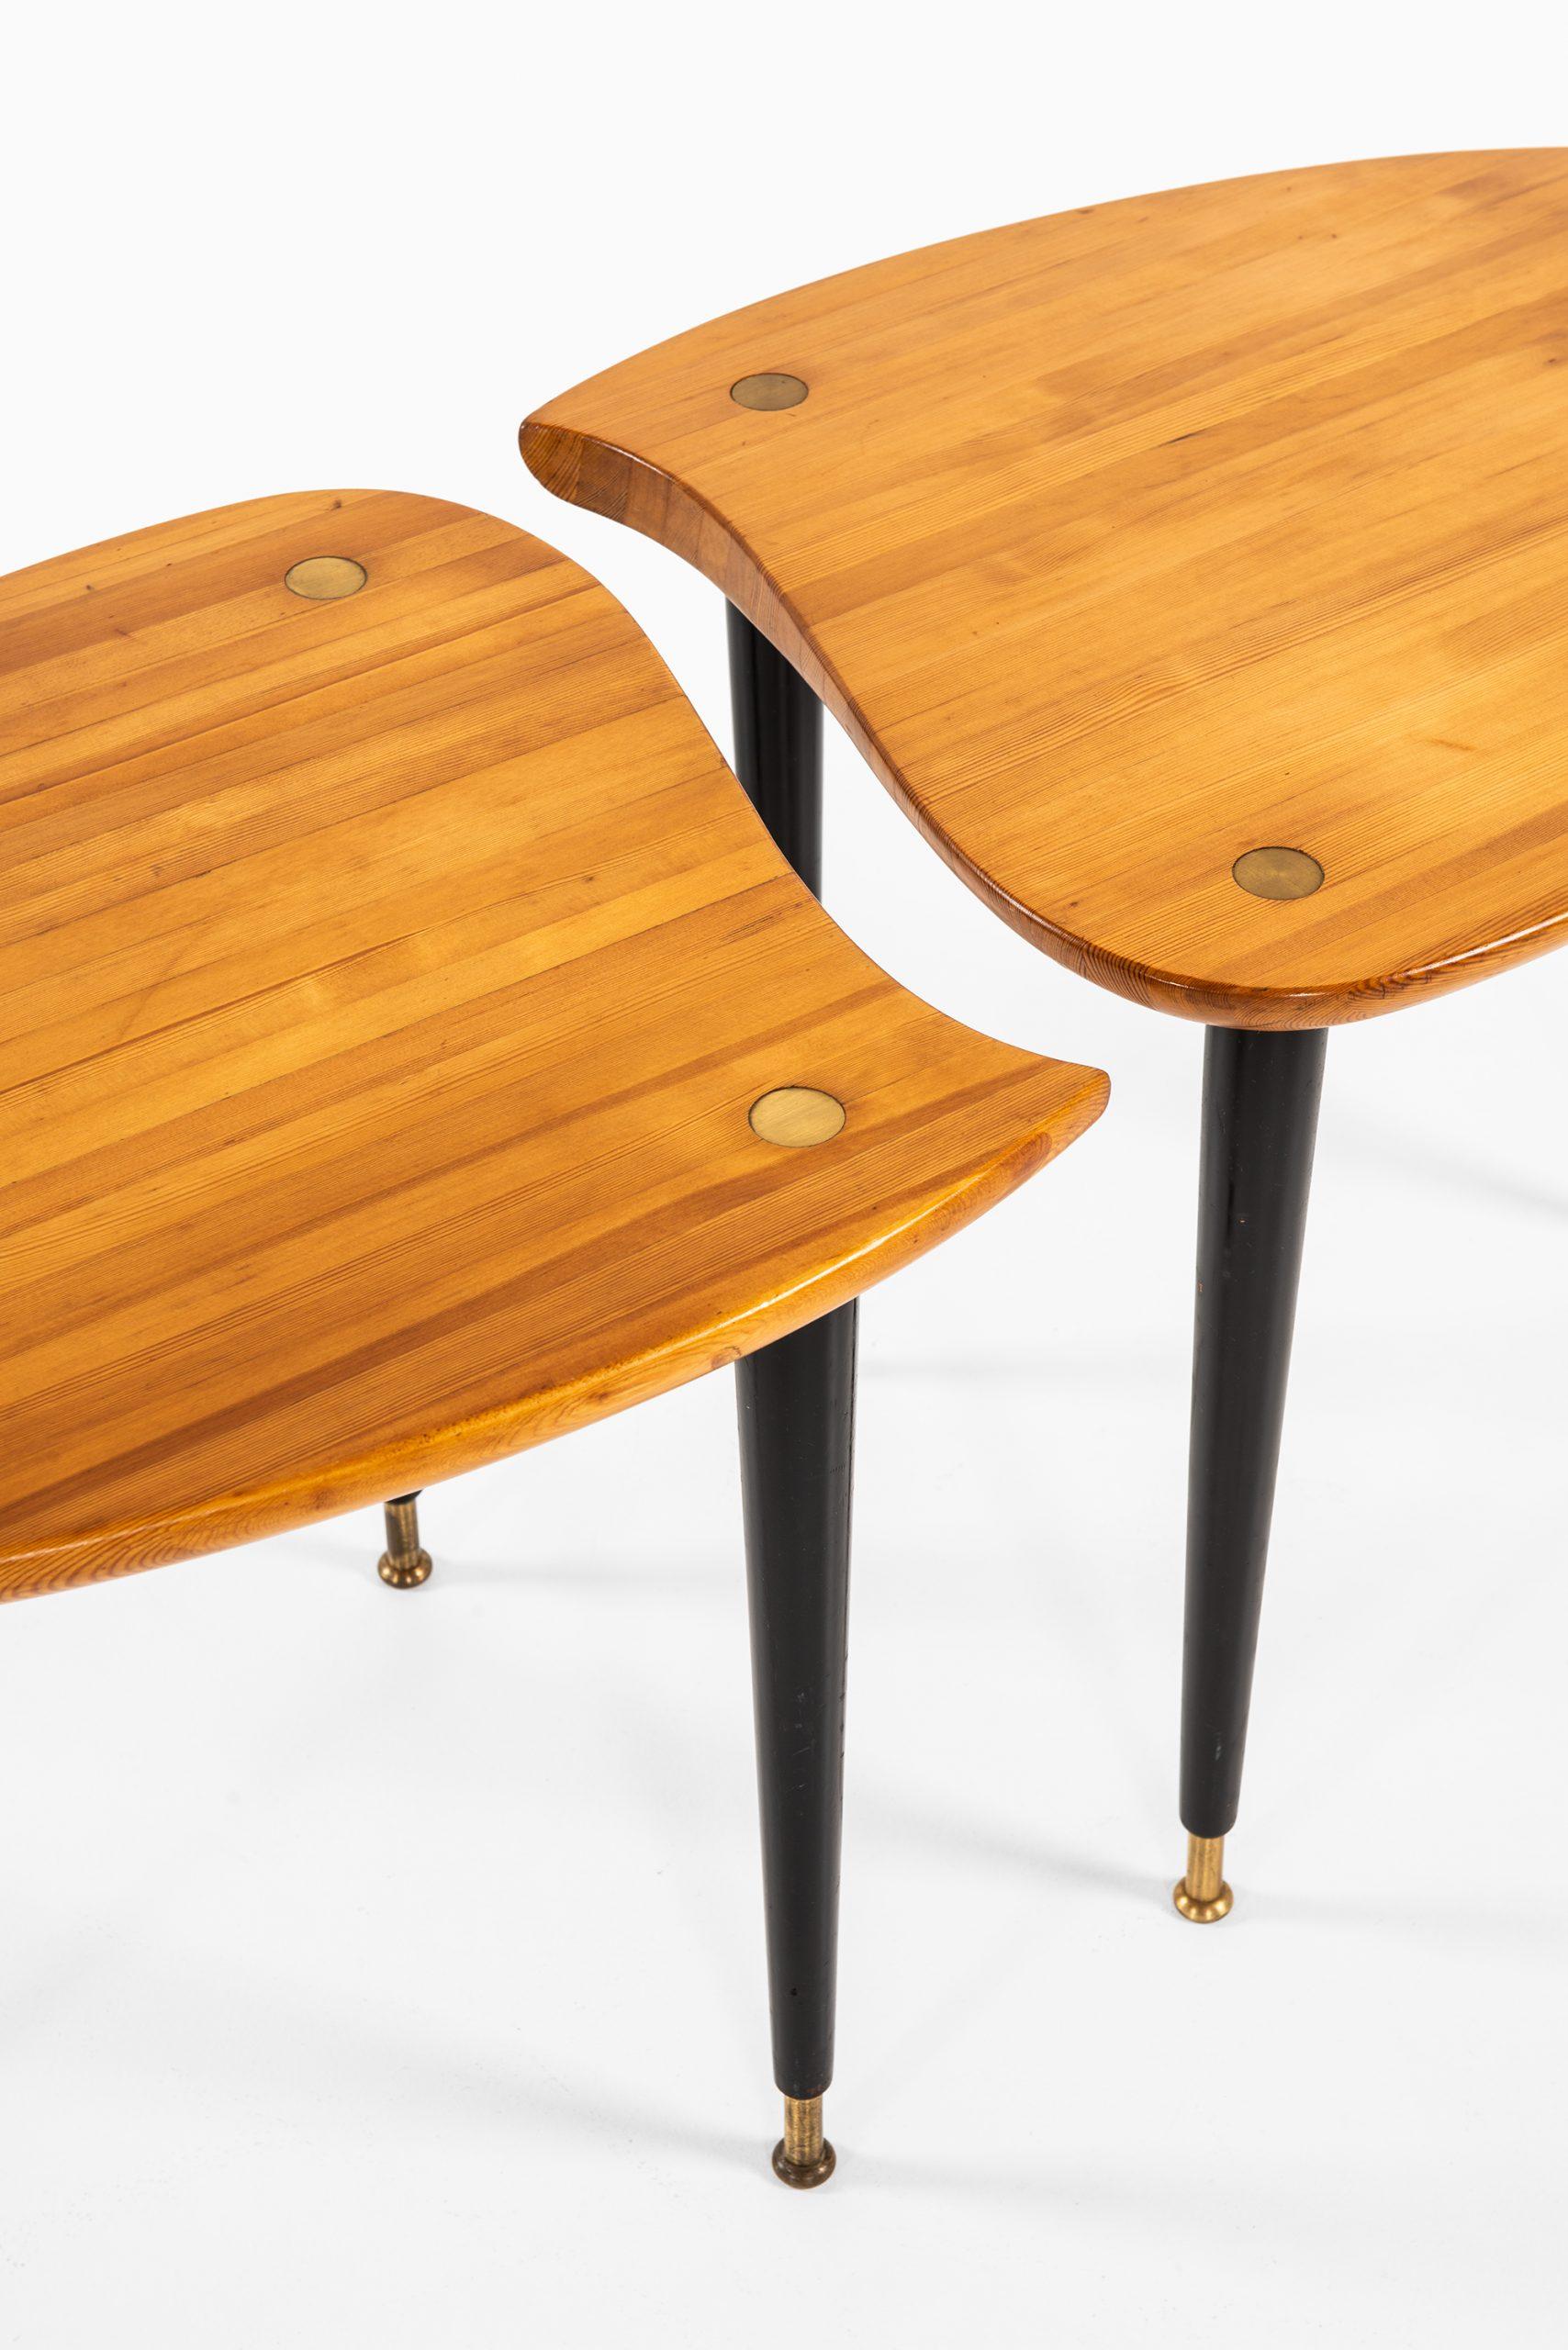 Rare pair of side tables by unknown designer. Produced by Svensk Fur in Sweden.